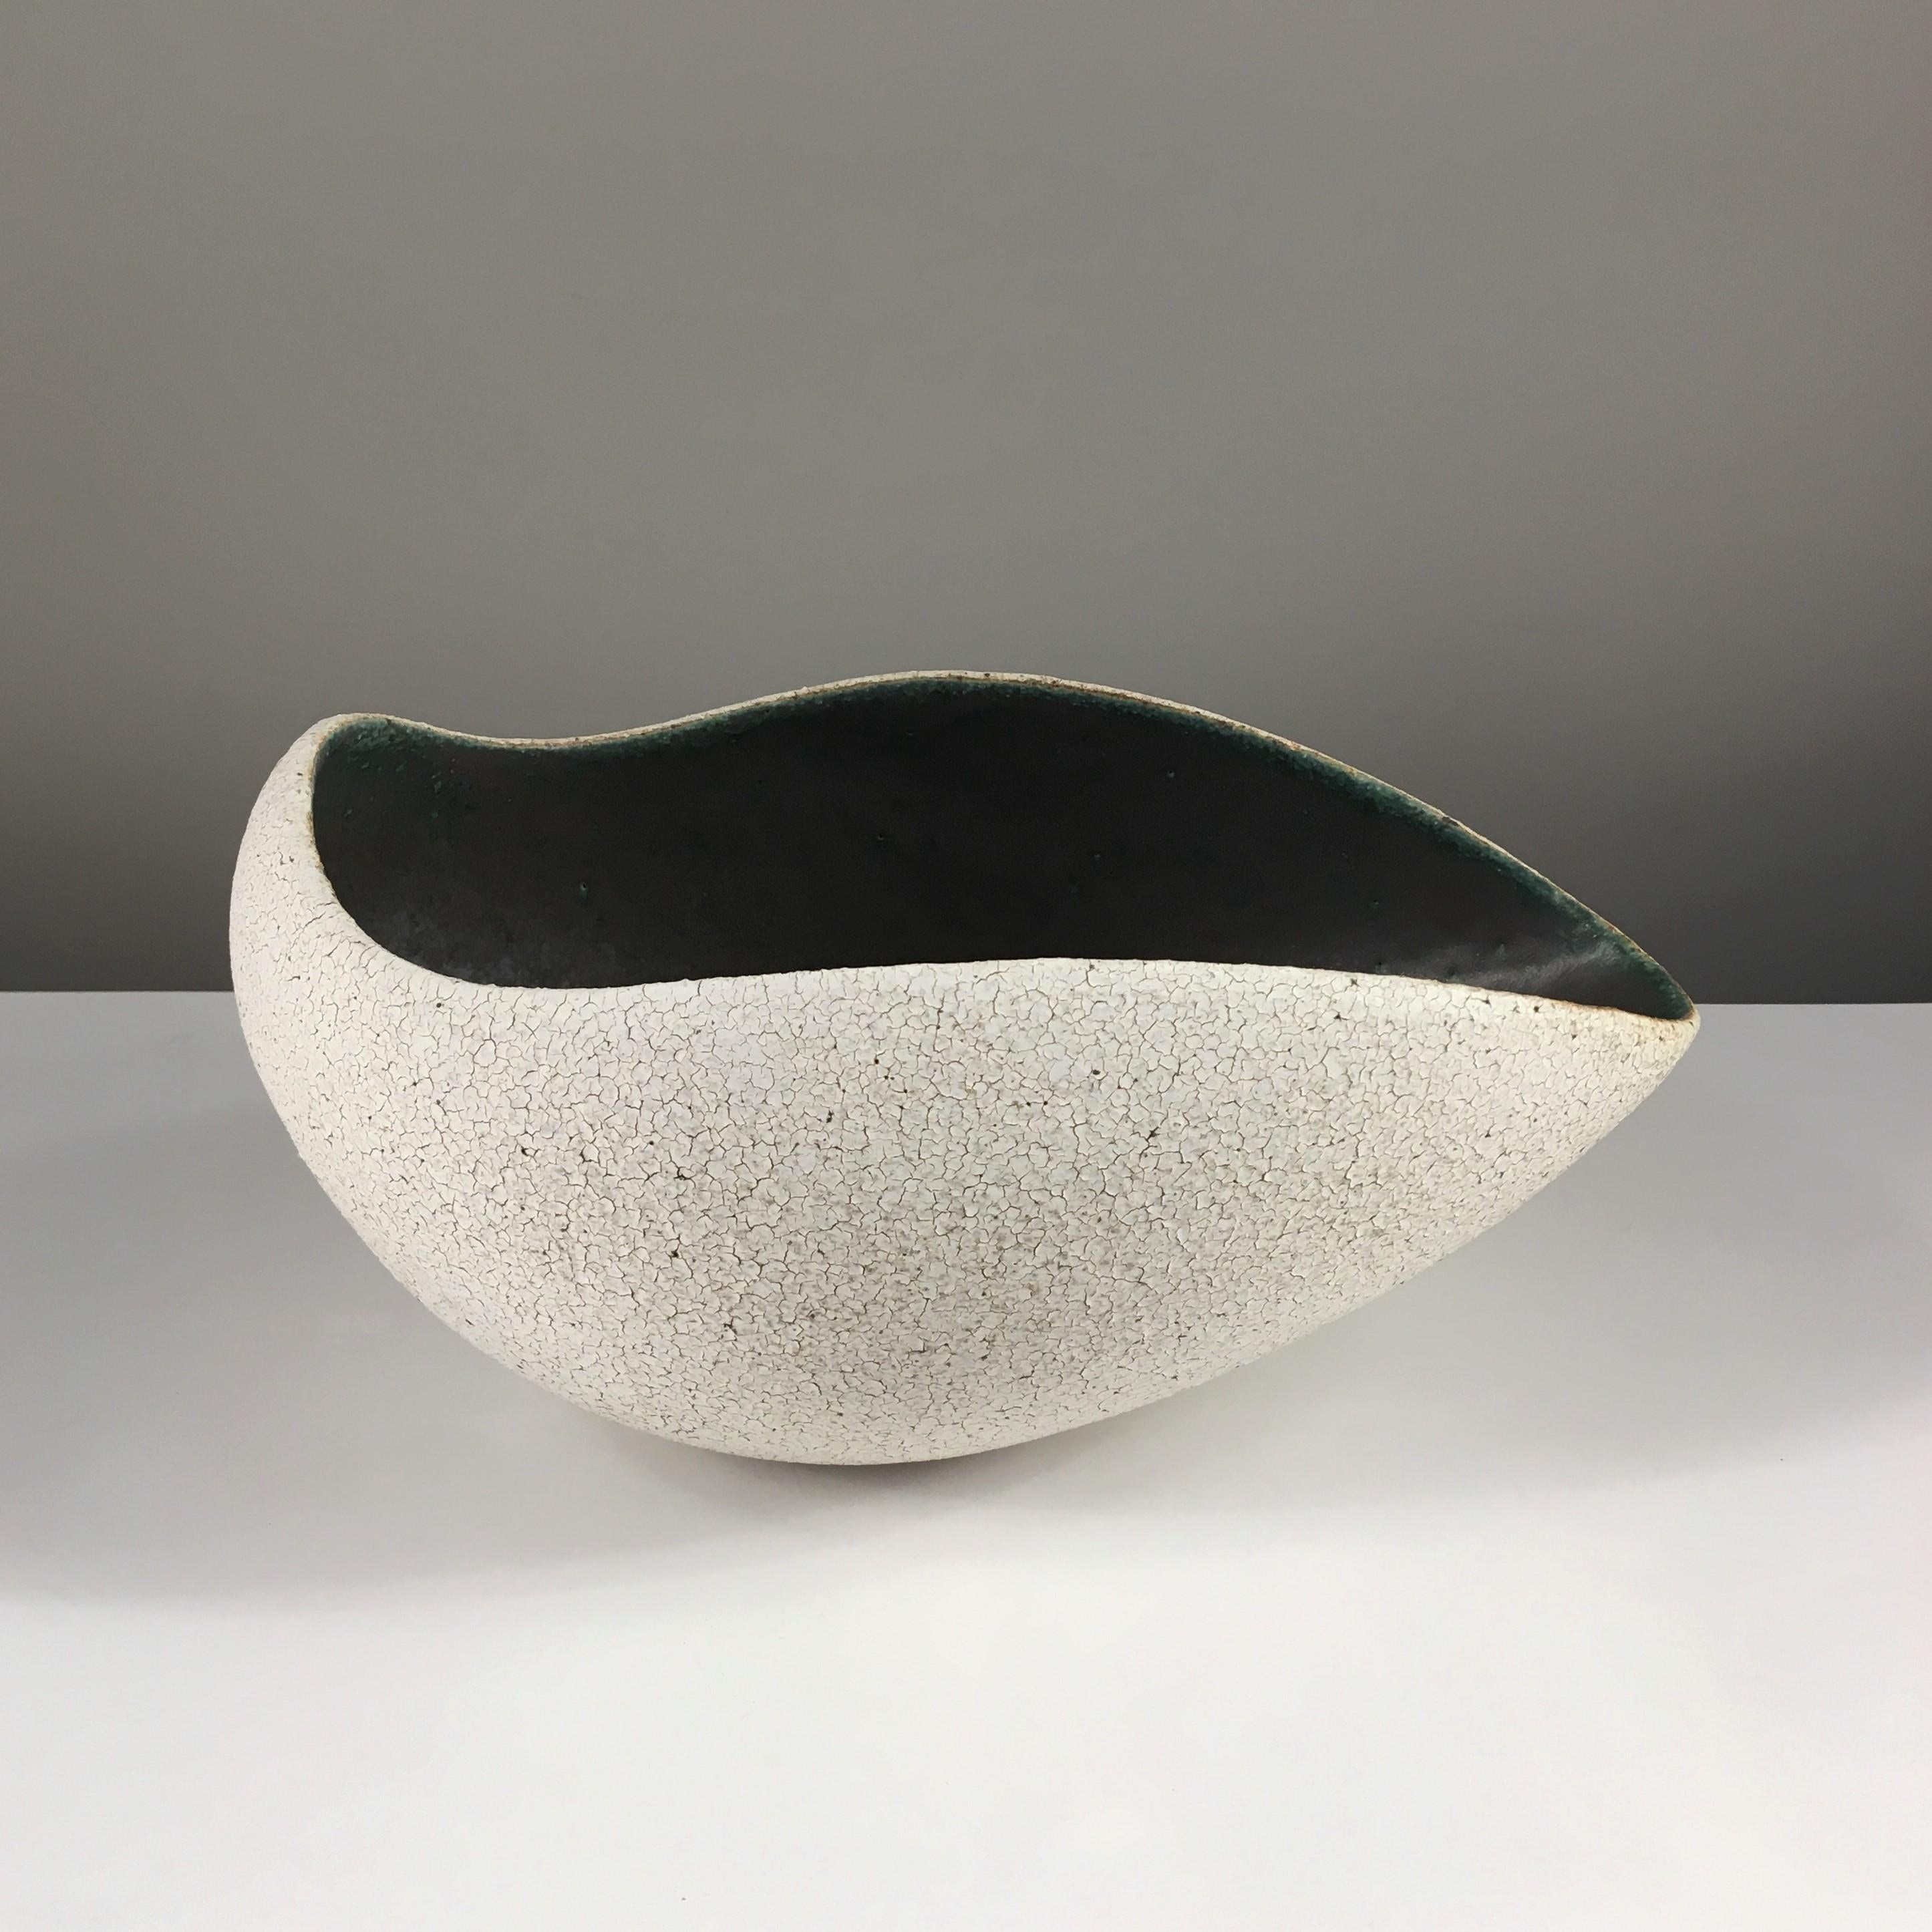 Boat Shaped Bowl with Glaze by Yumiko Kuga. Dimensions: W 11